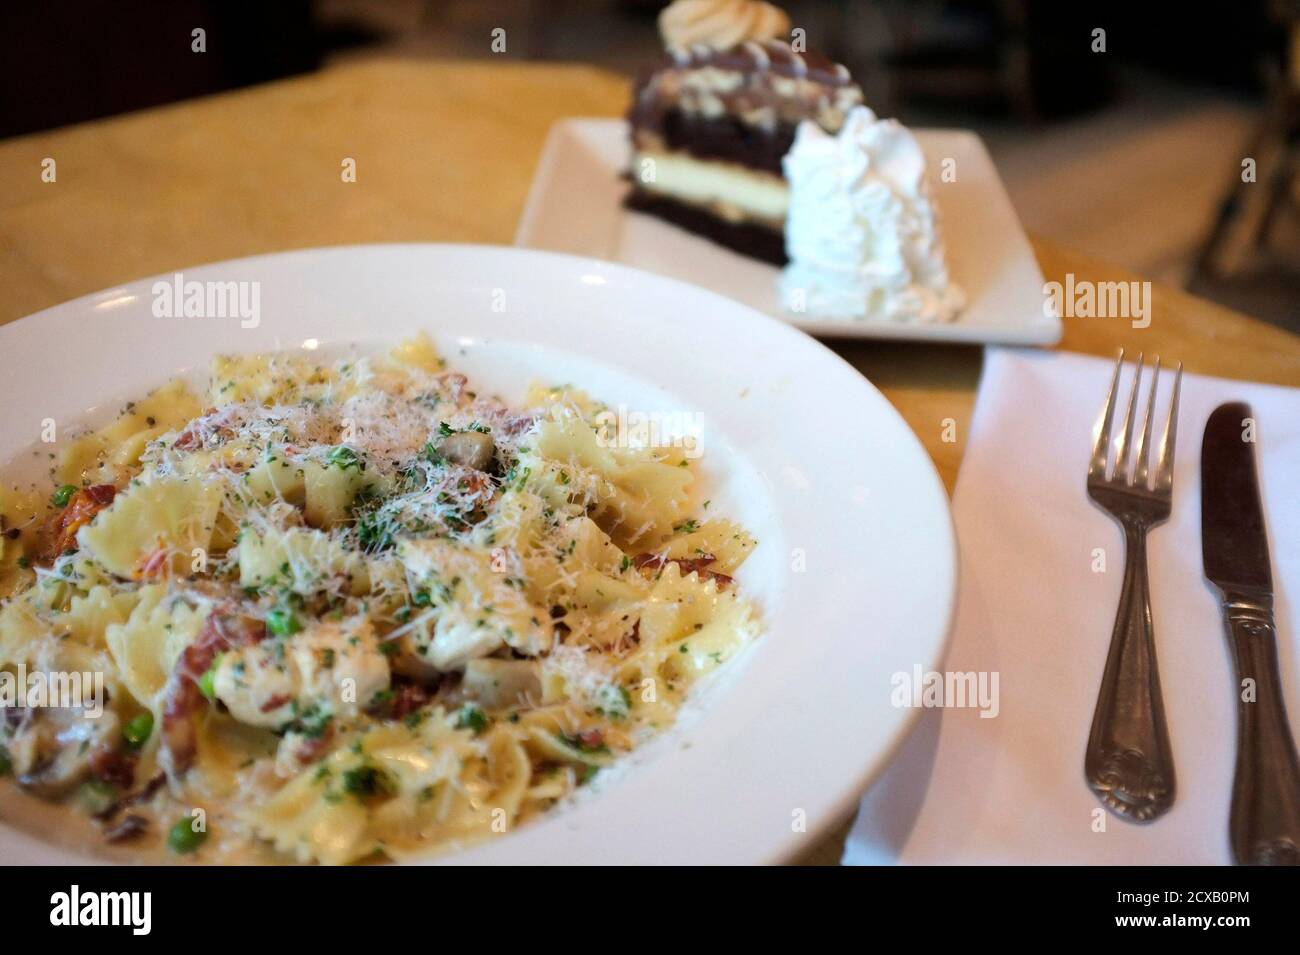 Featured image of post Cheesecake Farfalle With Chicken And Roasted Garlic Chicken salad sandwichhousemade with roasted almonds lettuce tomato and mayonnaise on grilled brioche bread